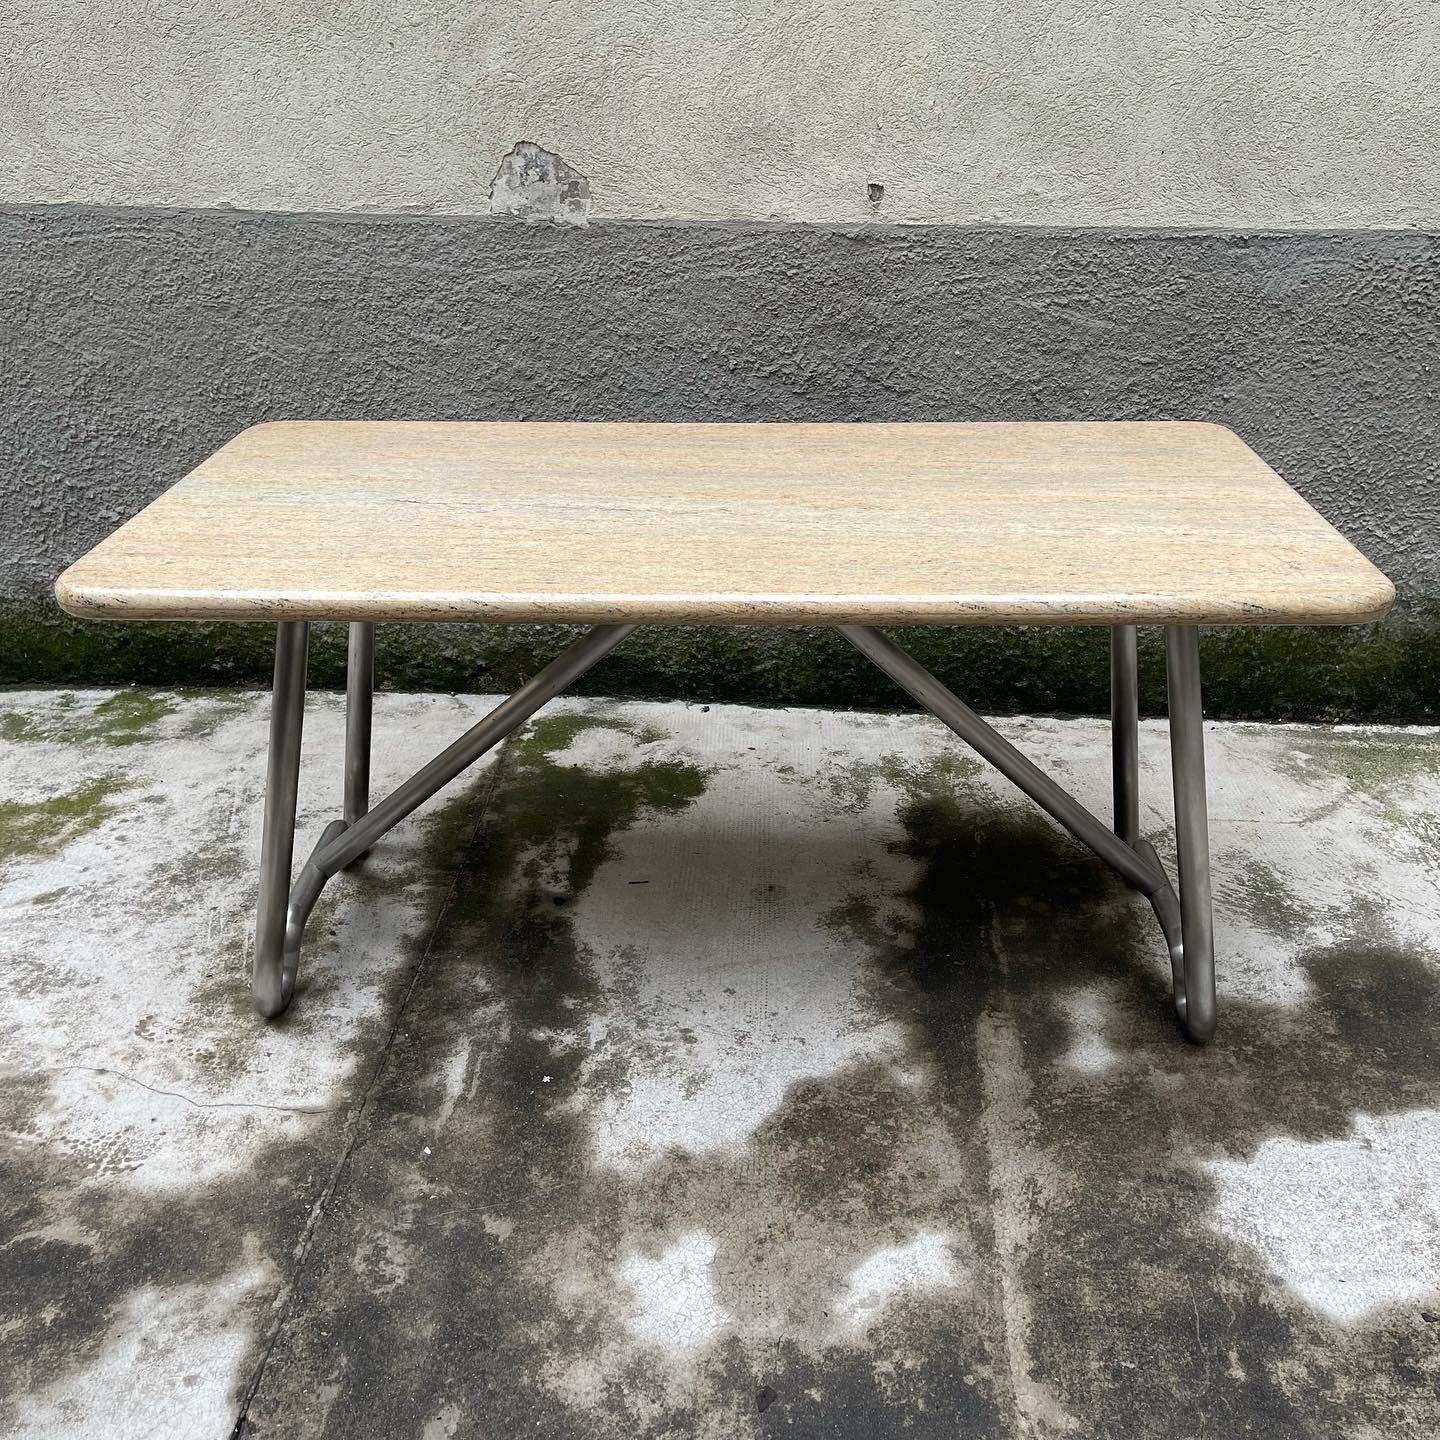 Solid table with a tubular steel frame and a large marble top with rounded corners that can be used as a desk or dining table.
The peculiarity and uniqueness of this table lies in the high quality of the steel workmanship, in that, the structure is